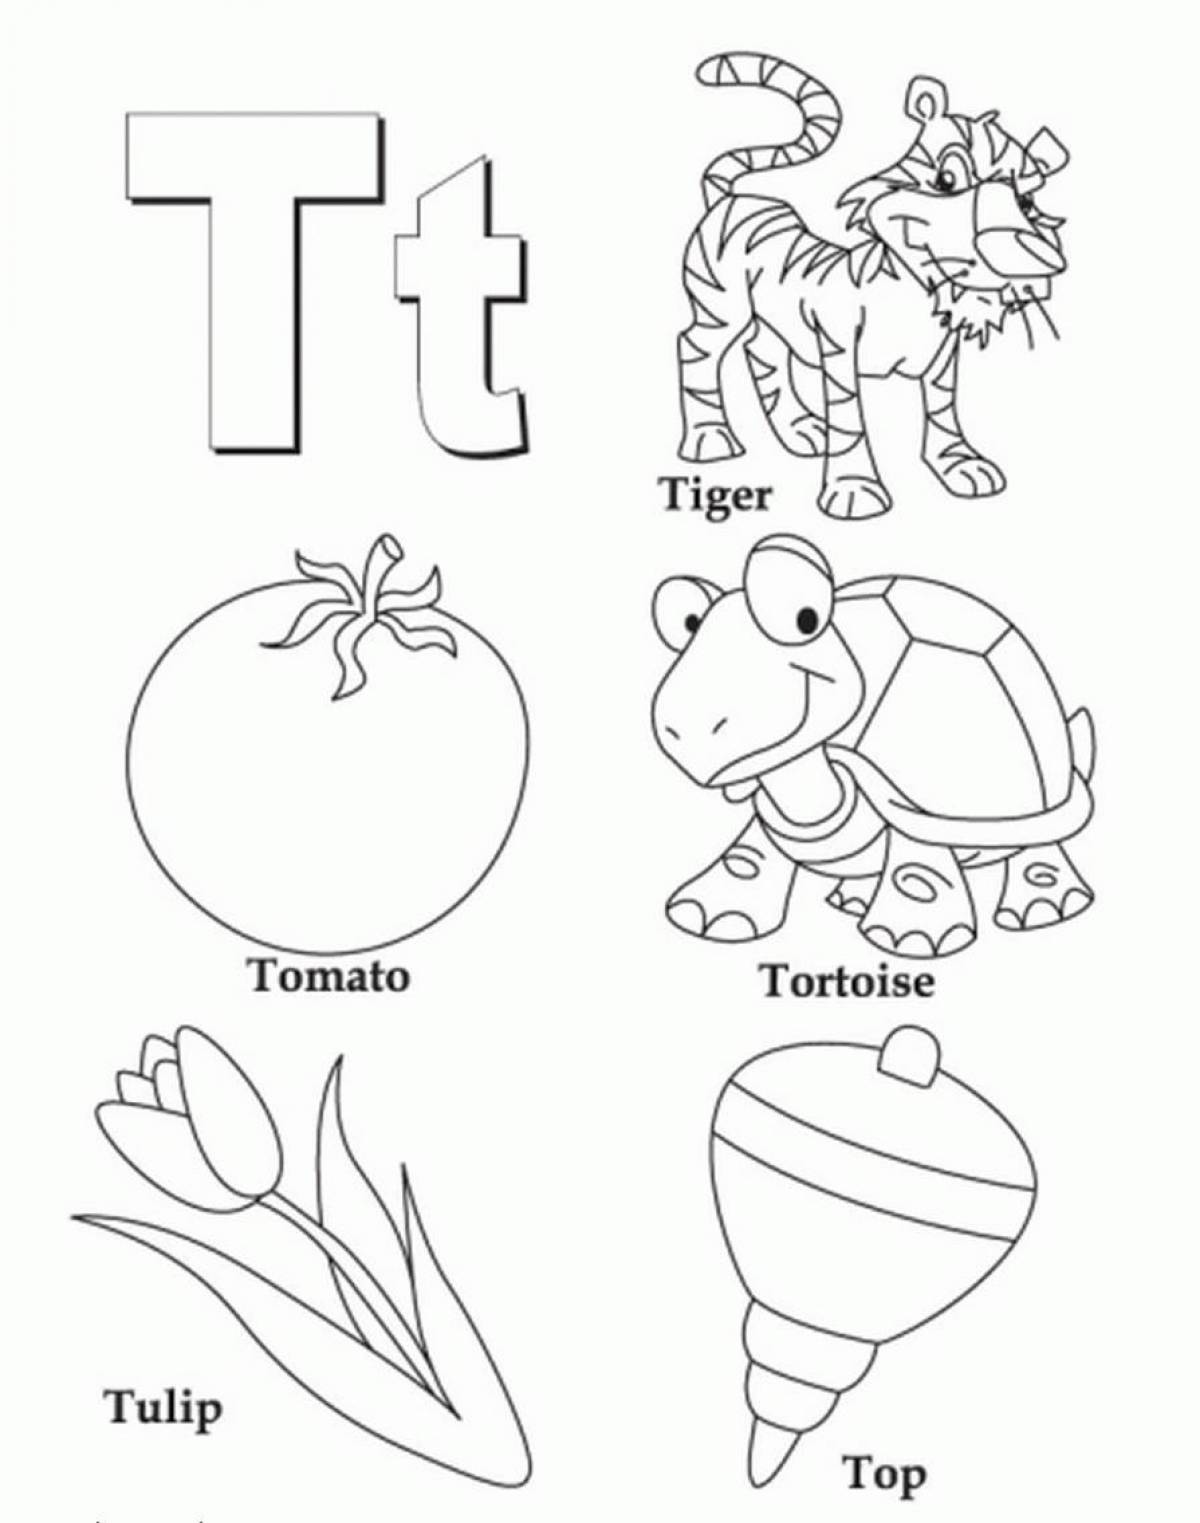 Fashion coloring pages with english letters